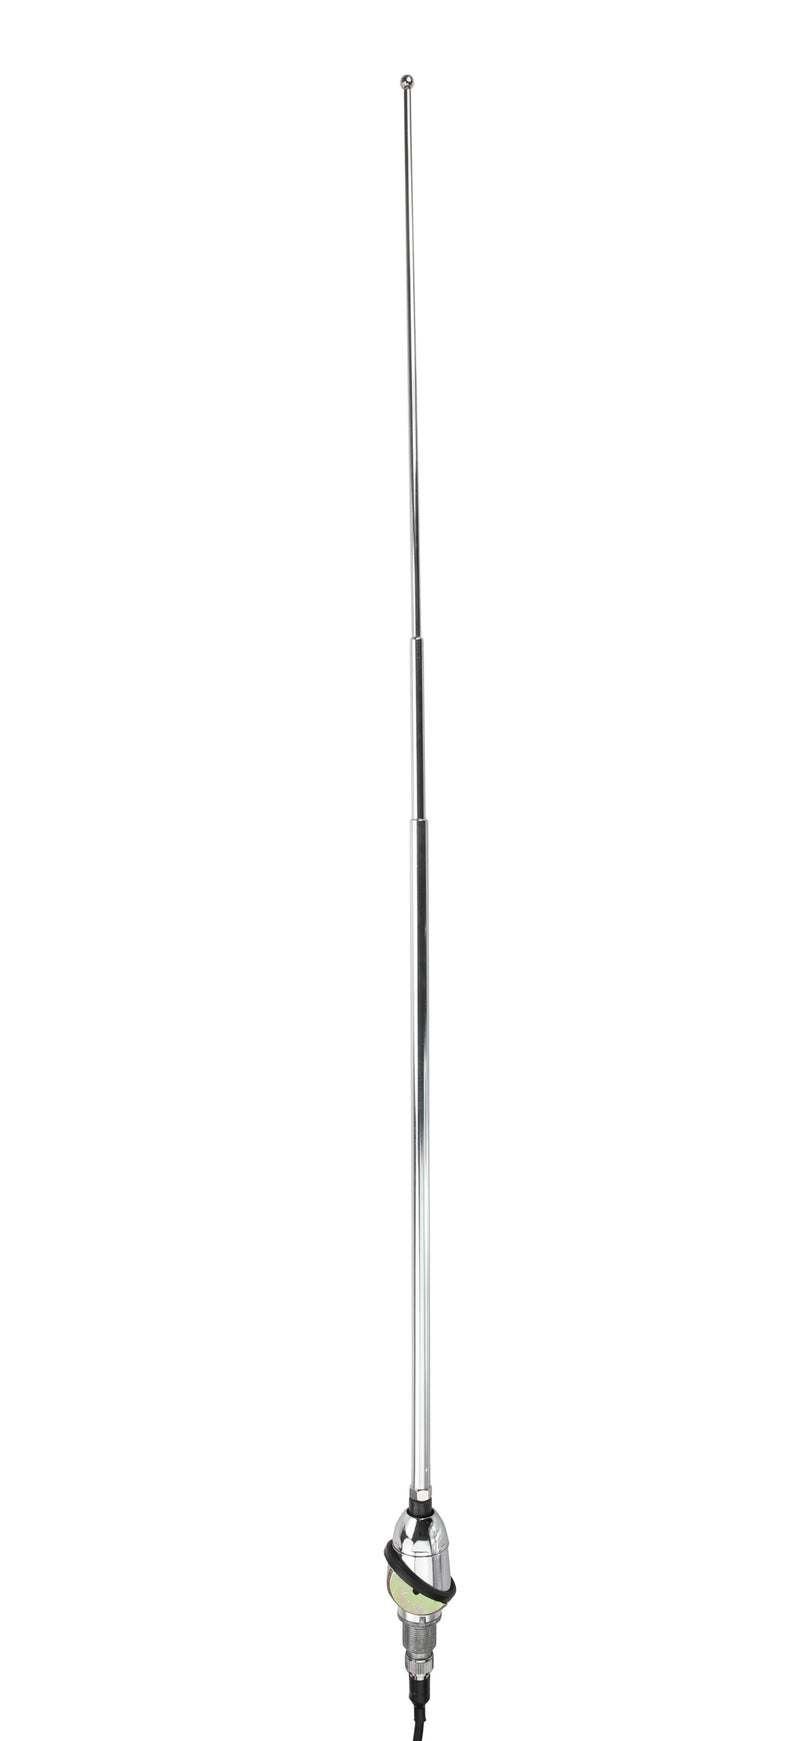 1965-66 Chevrolet Impala Replacement Antenna